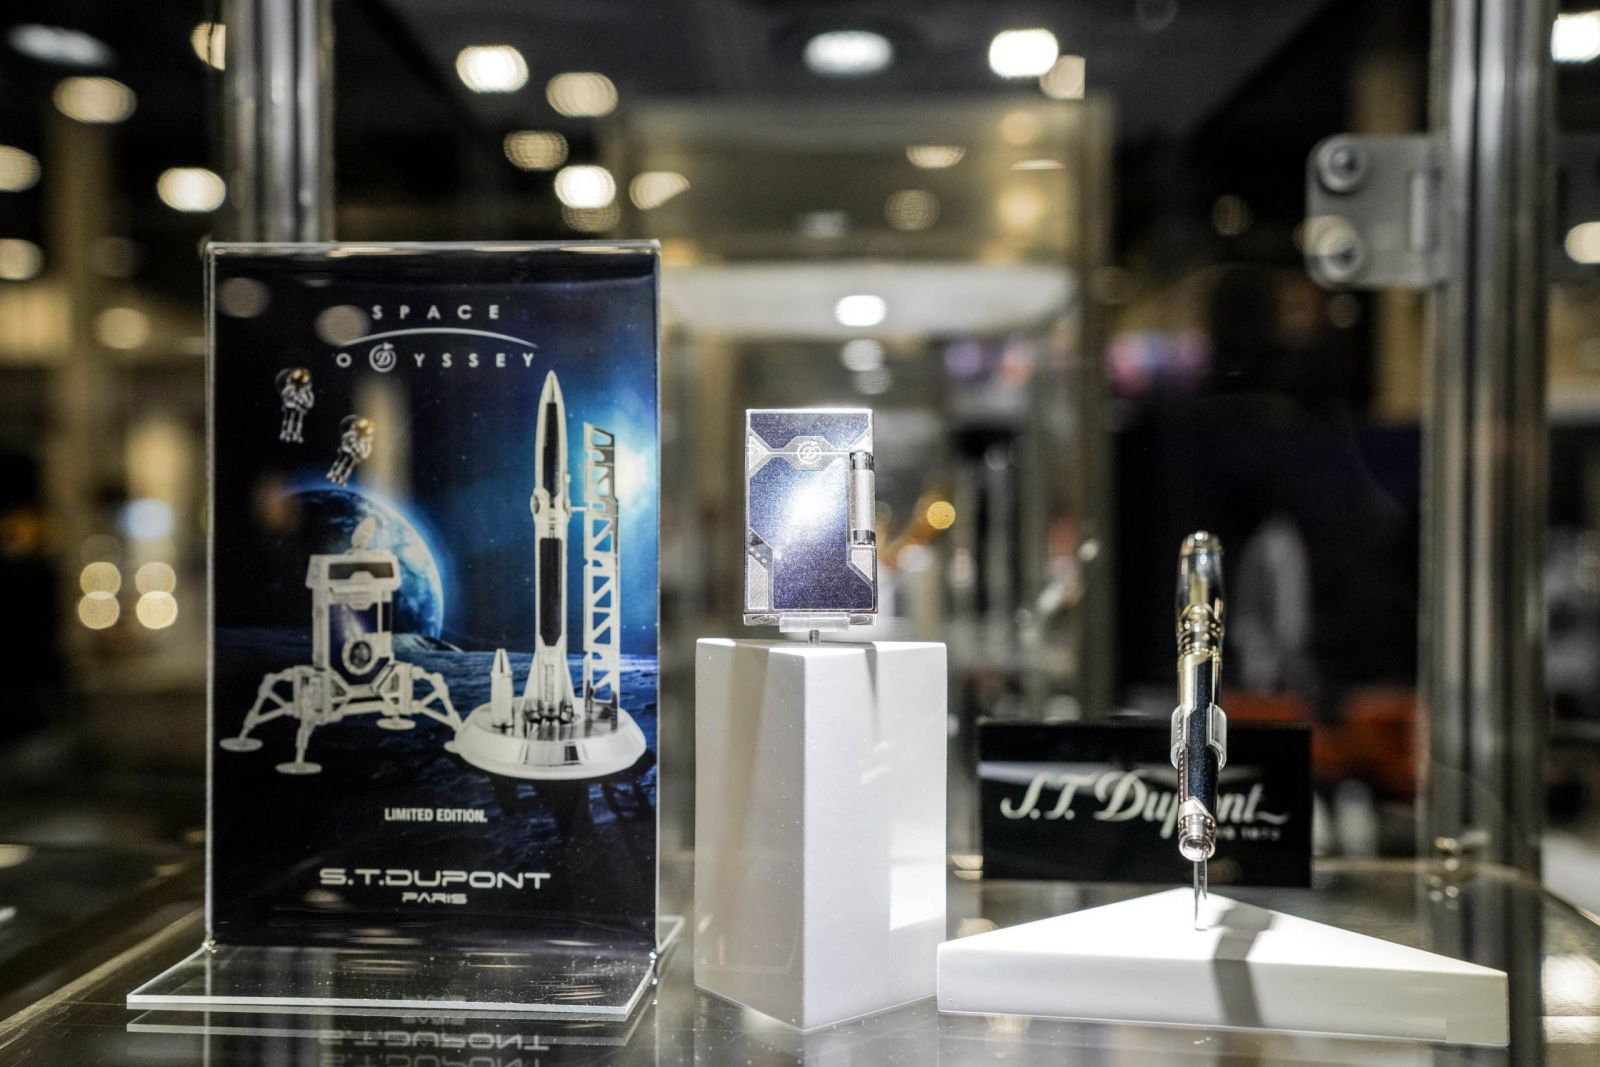 S.T. Dupont Space Odyssey Prestige Collectors Limited Edition bán tại hà nội